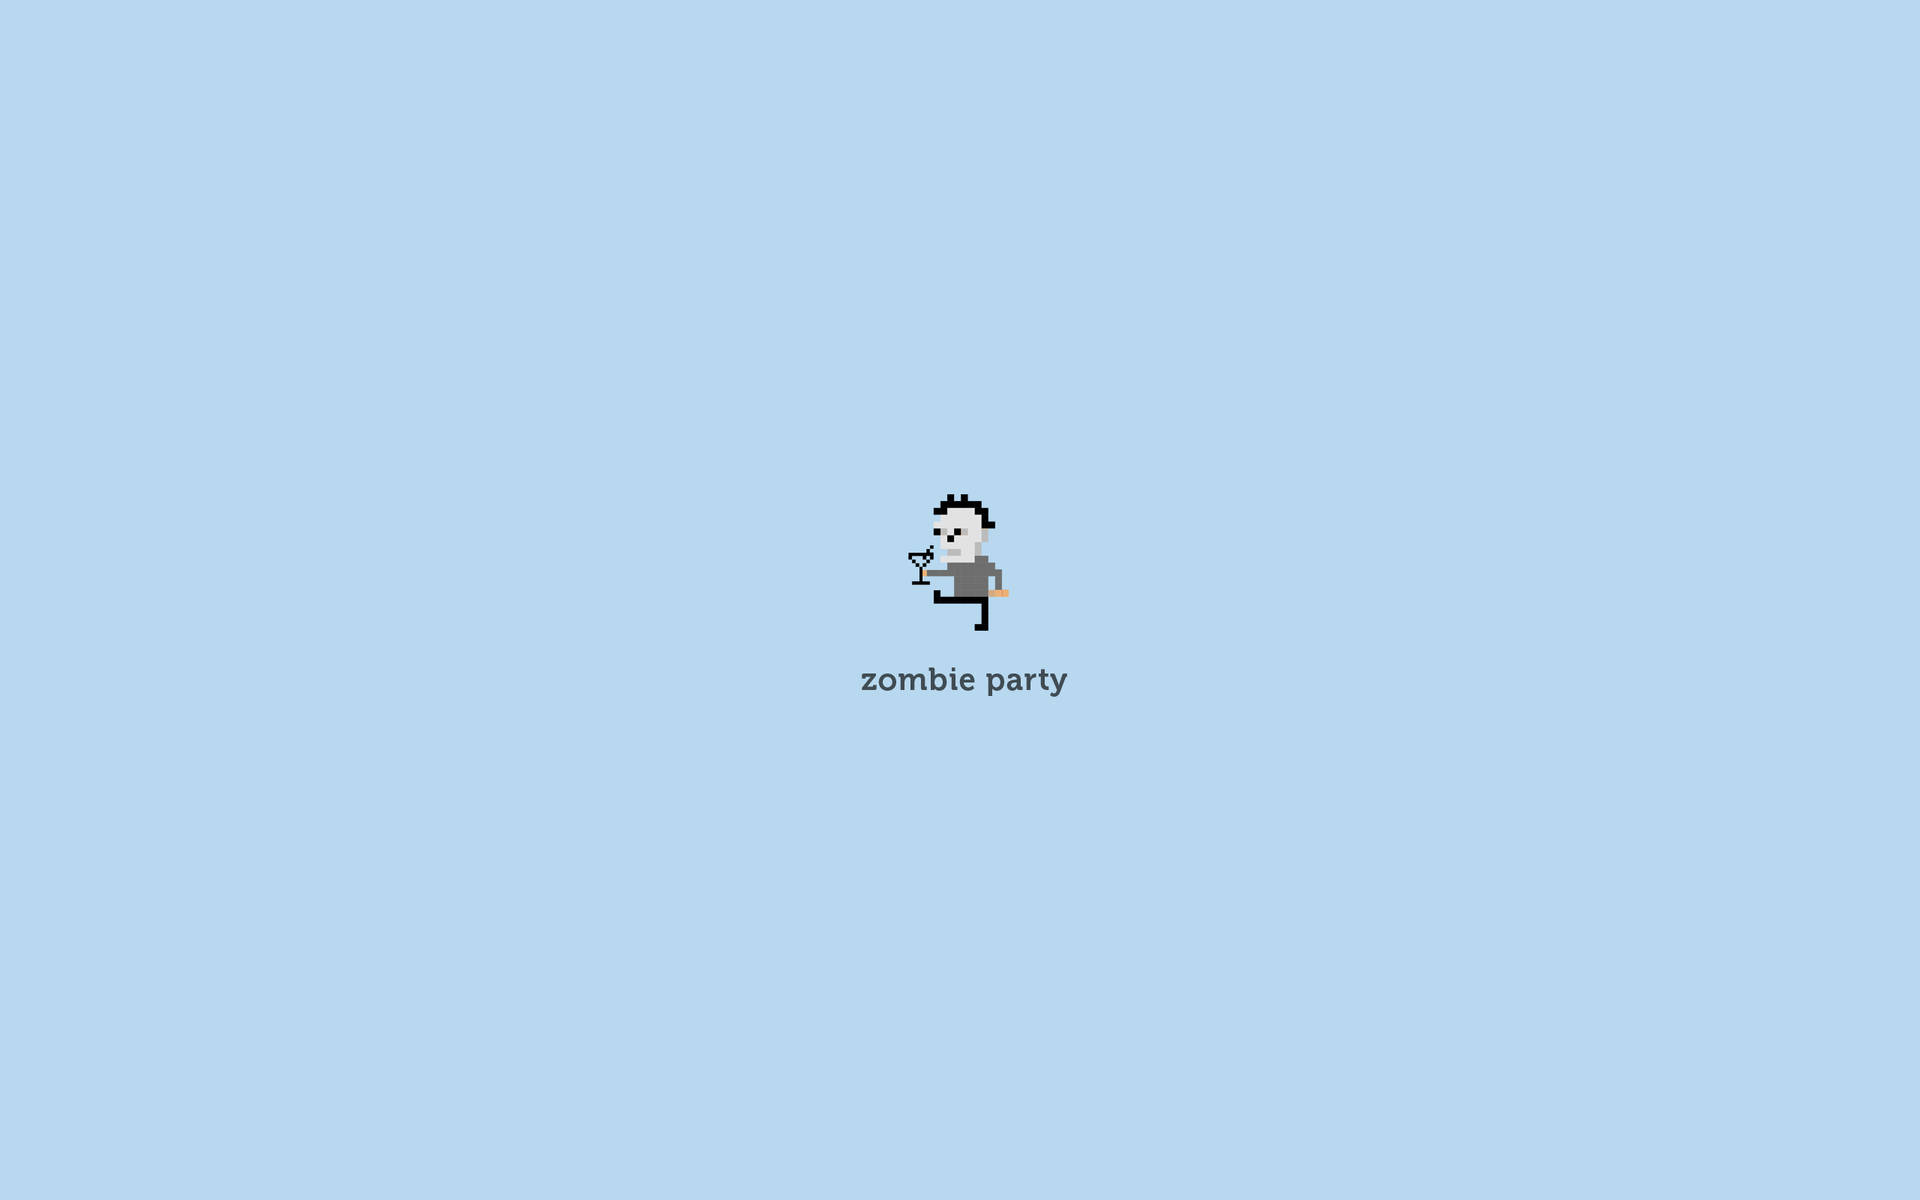 The tiny zombie hidden in the minimalist landscape Wallpaper